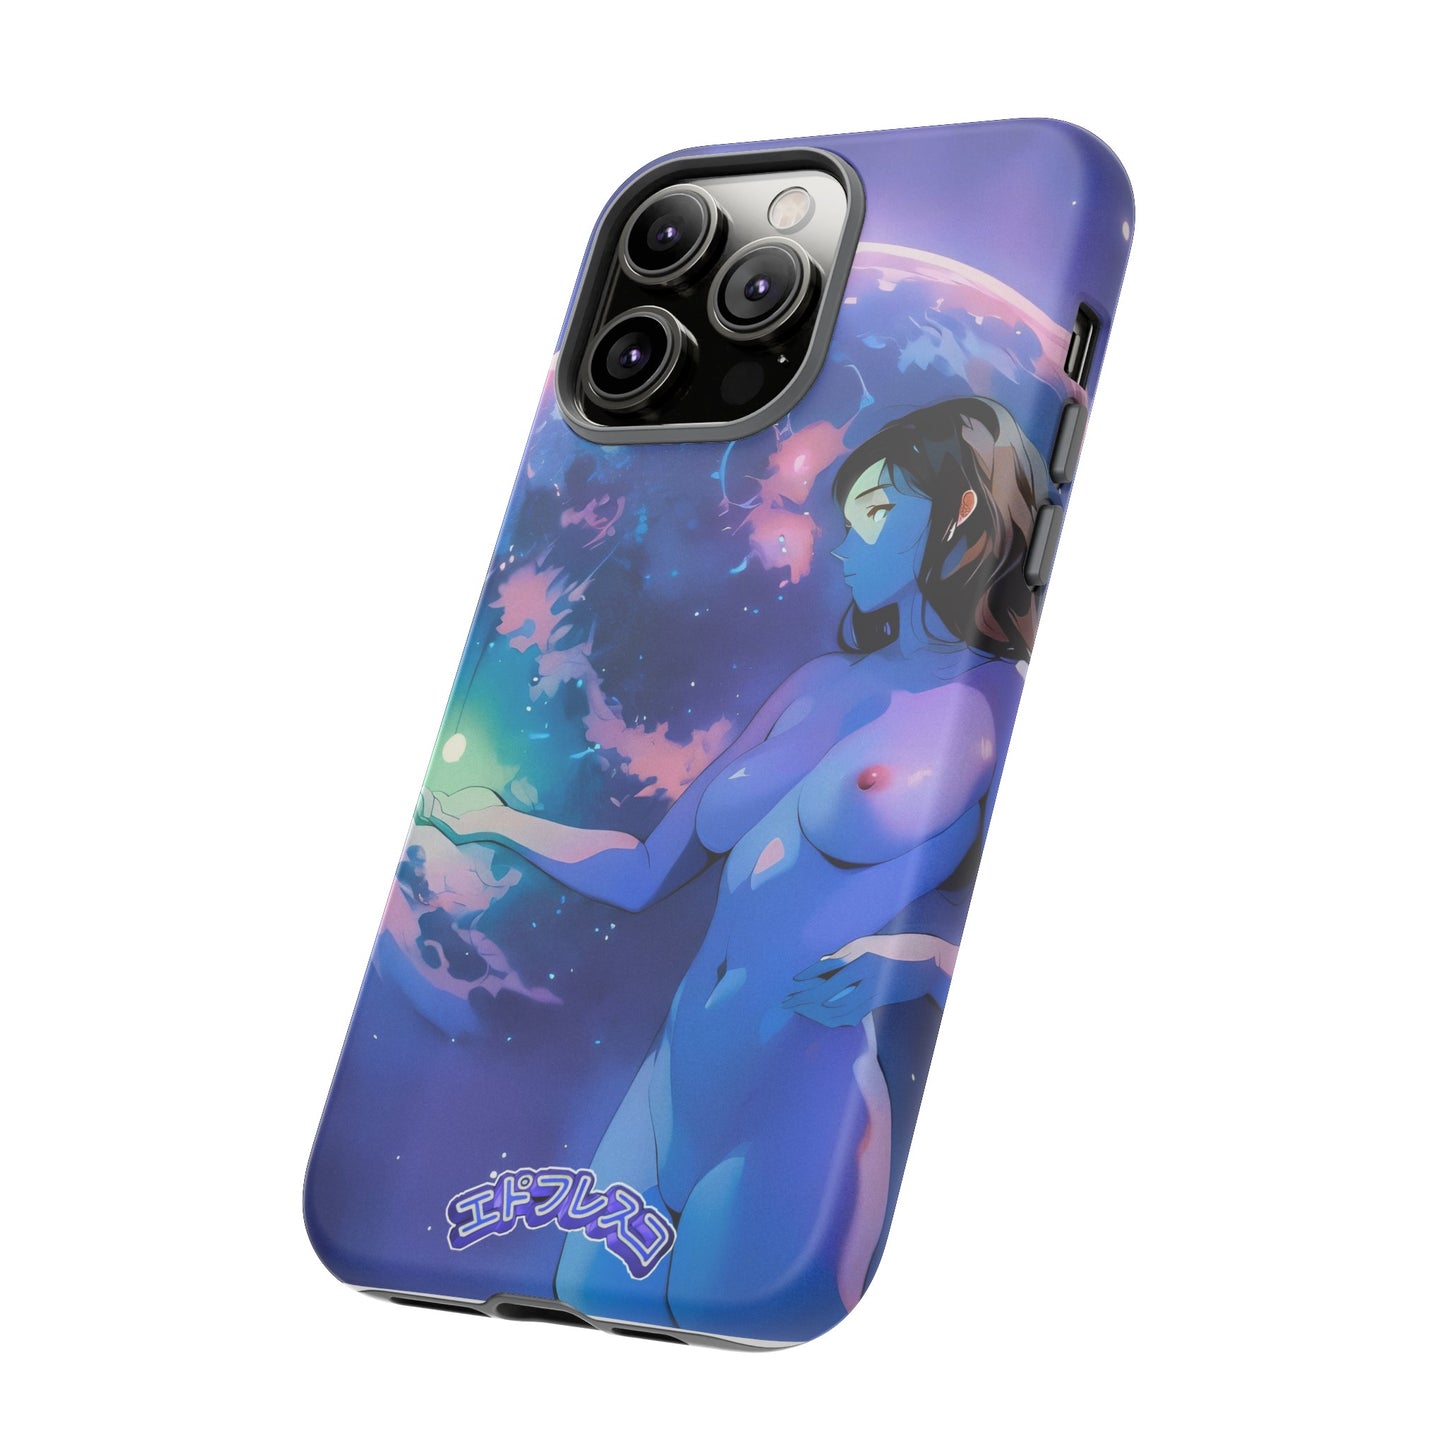 Anime Style Art Tough Cases- "Mother of Worlds"